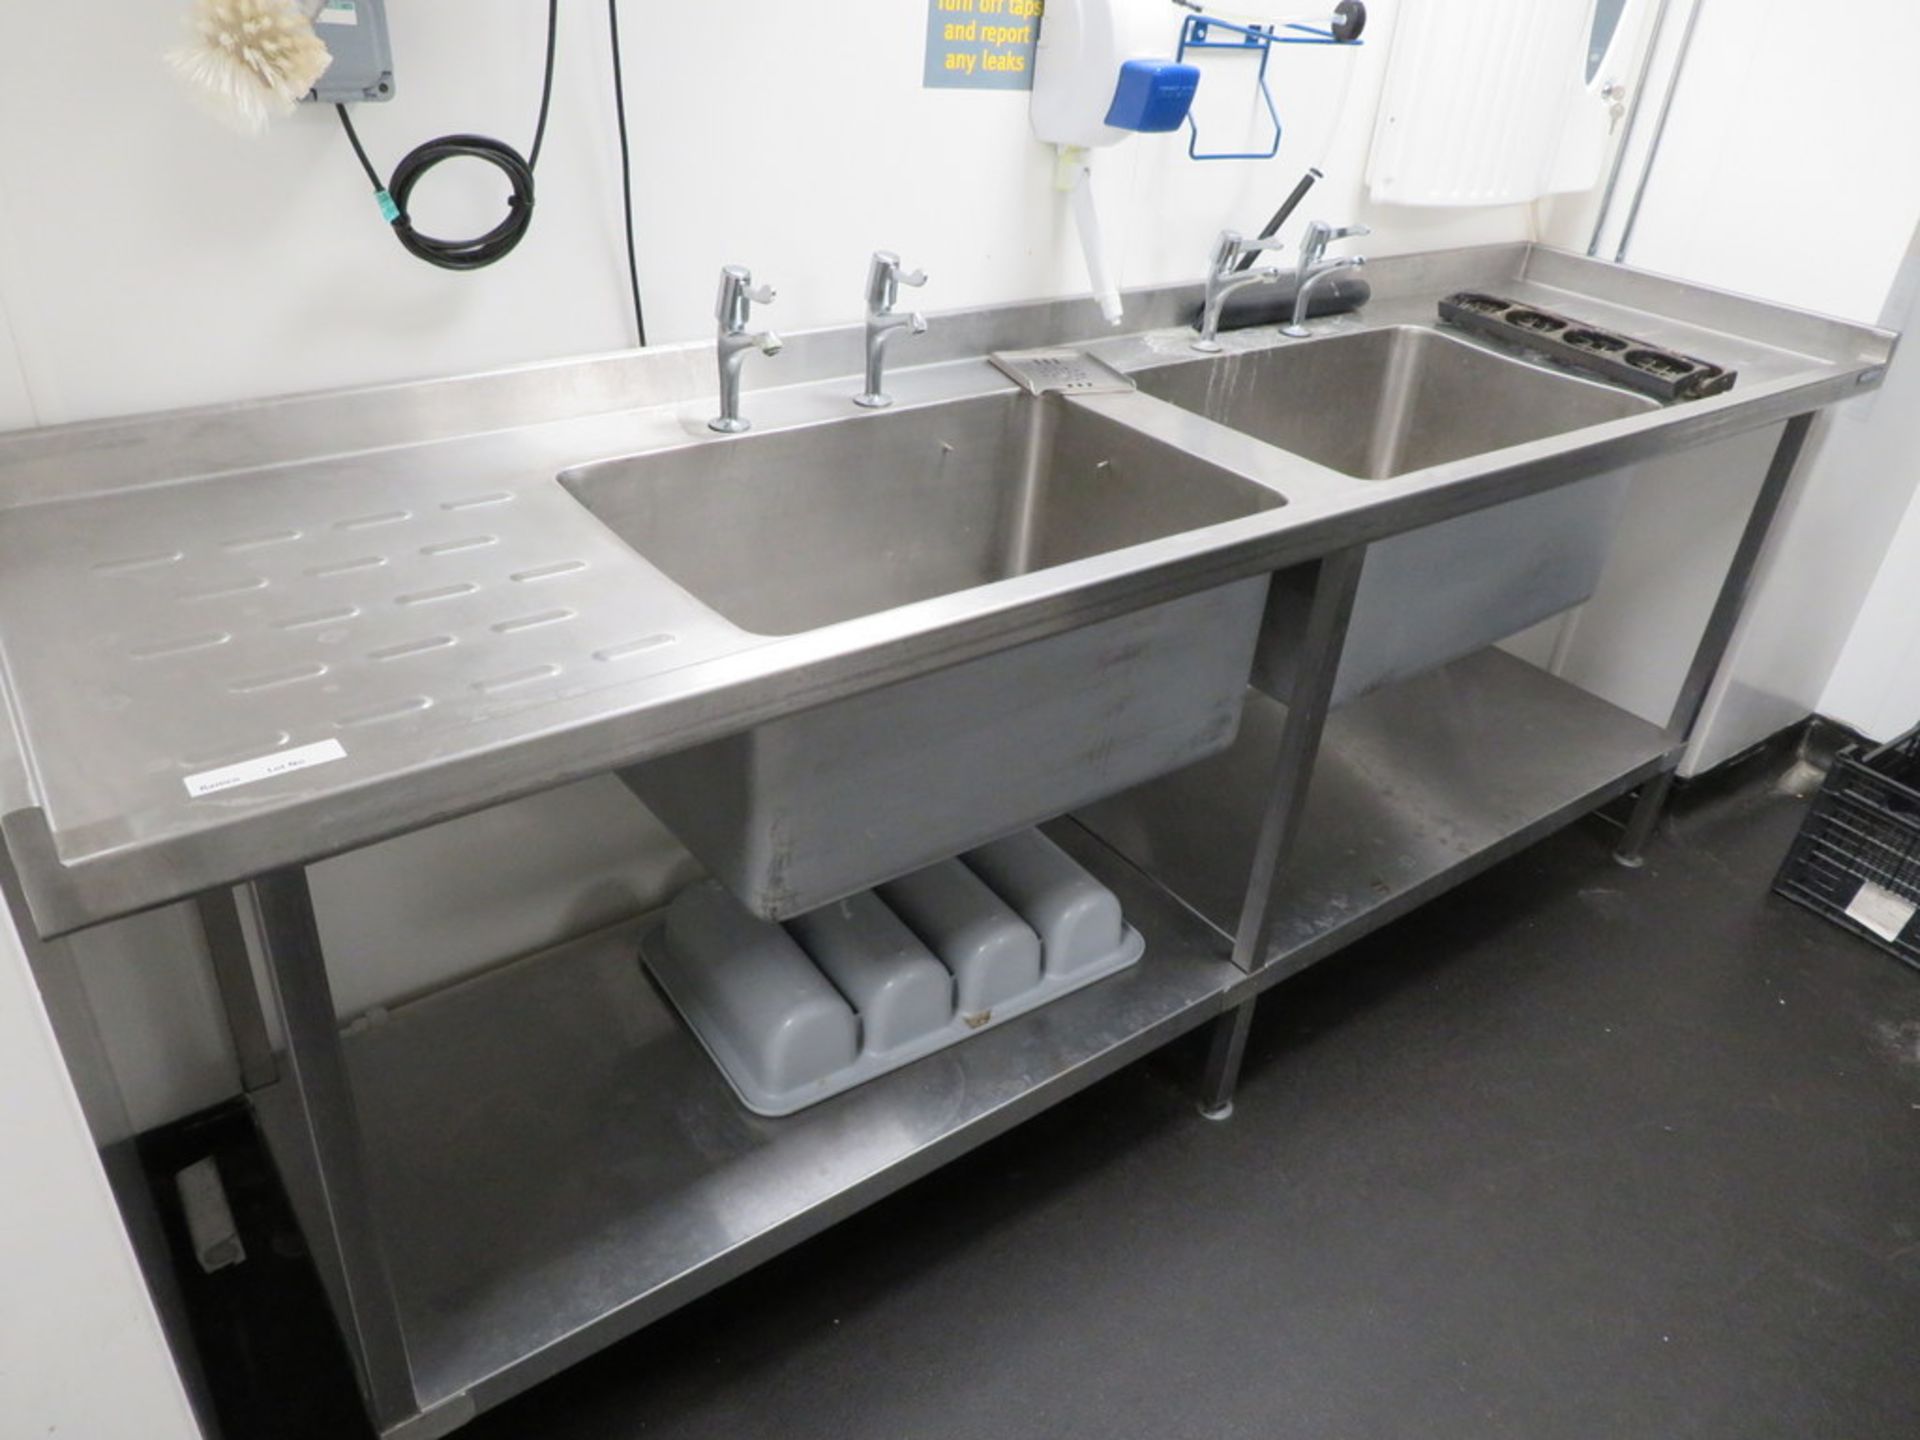 MOFFAT STAINLESS STEEL TWIN DEEP BOWL SINK UNIT WITH UNDERTIER